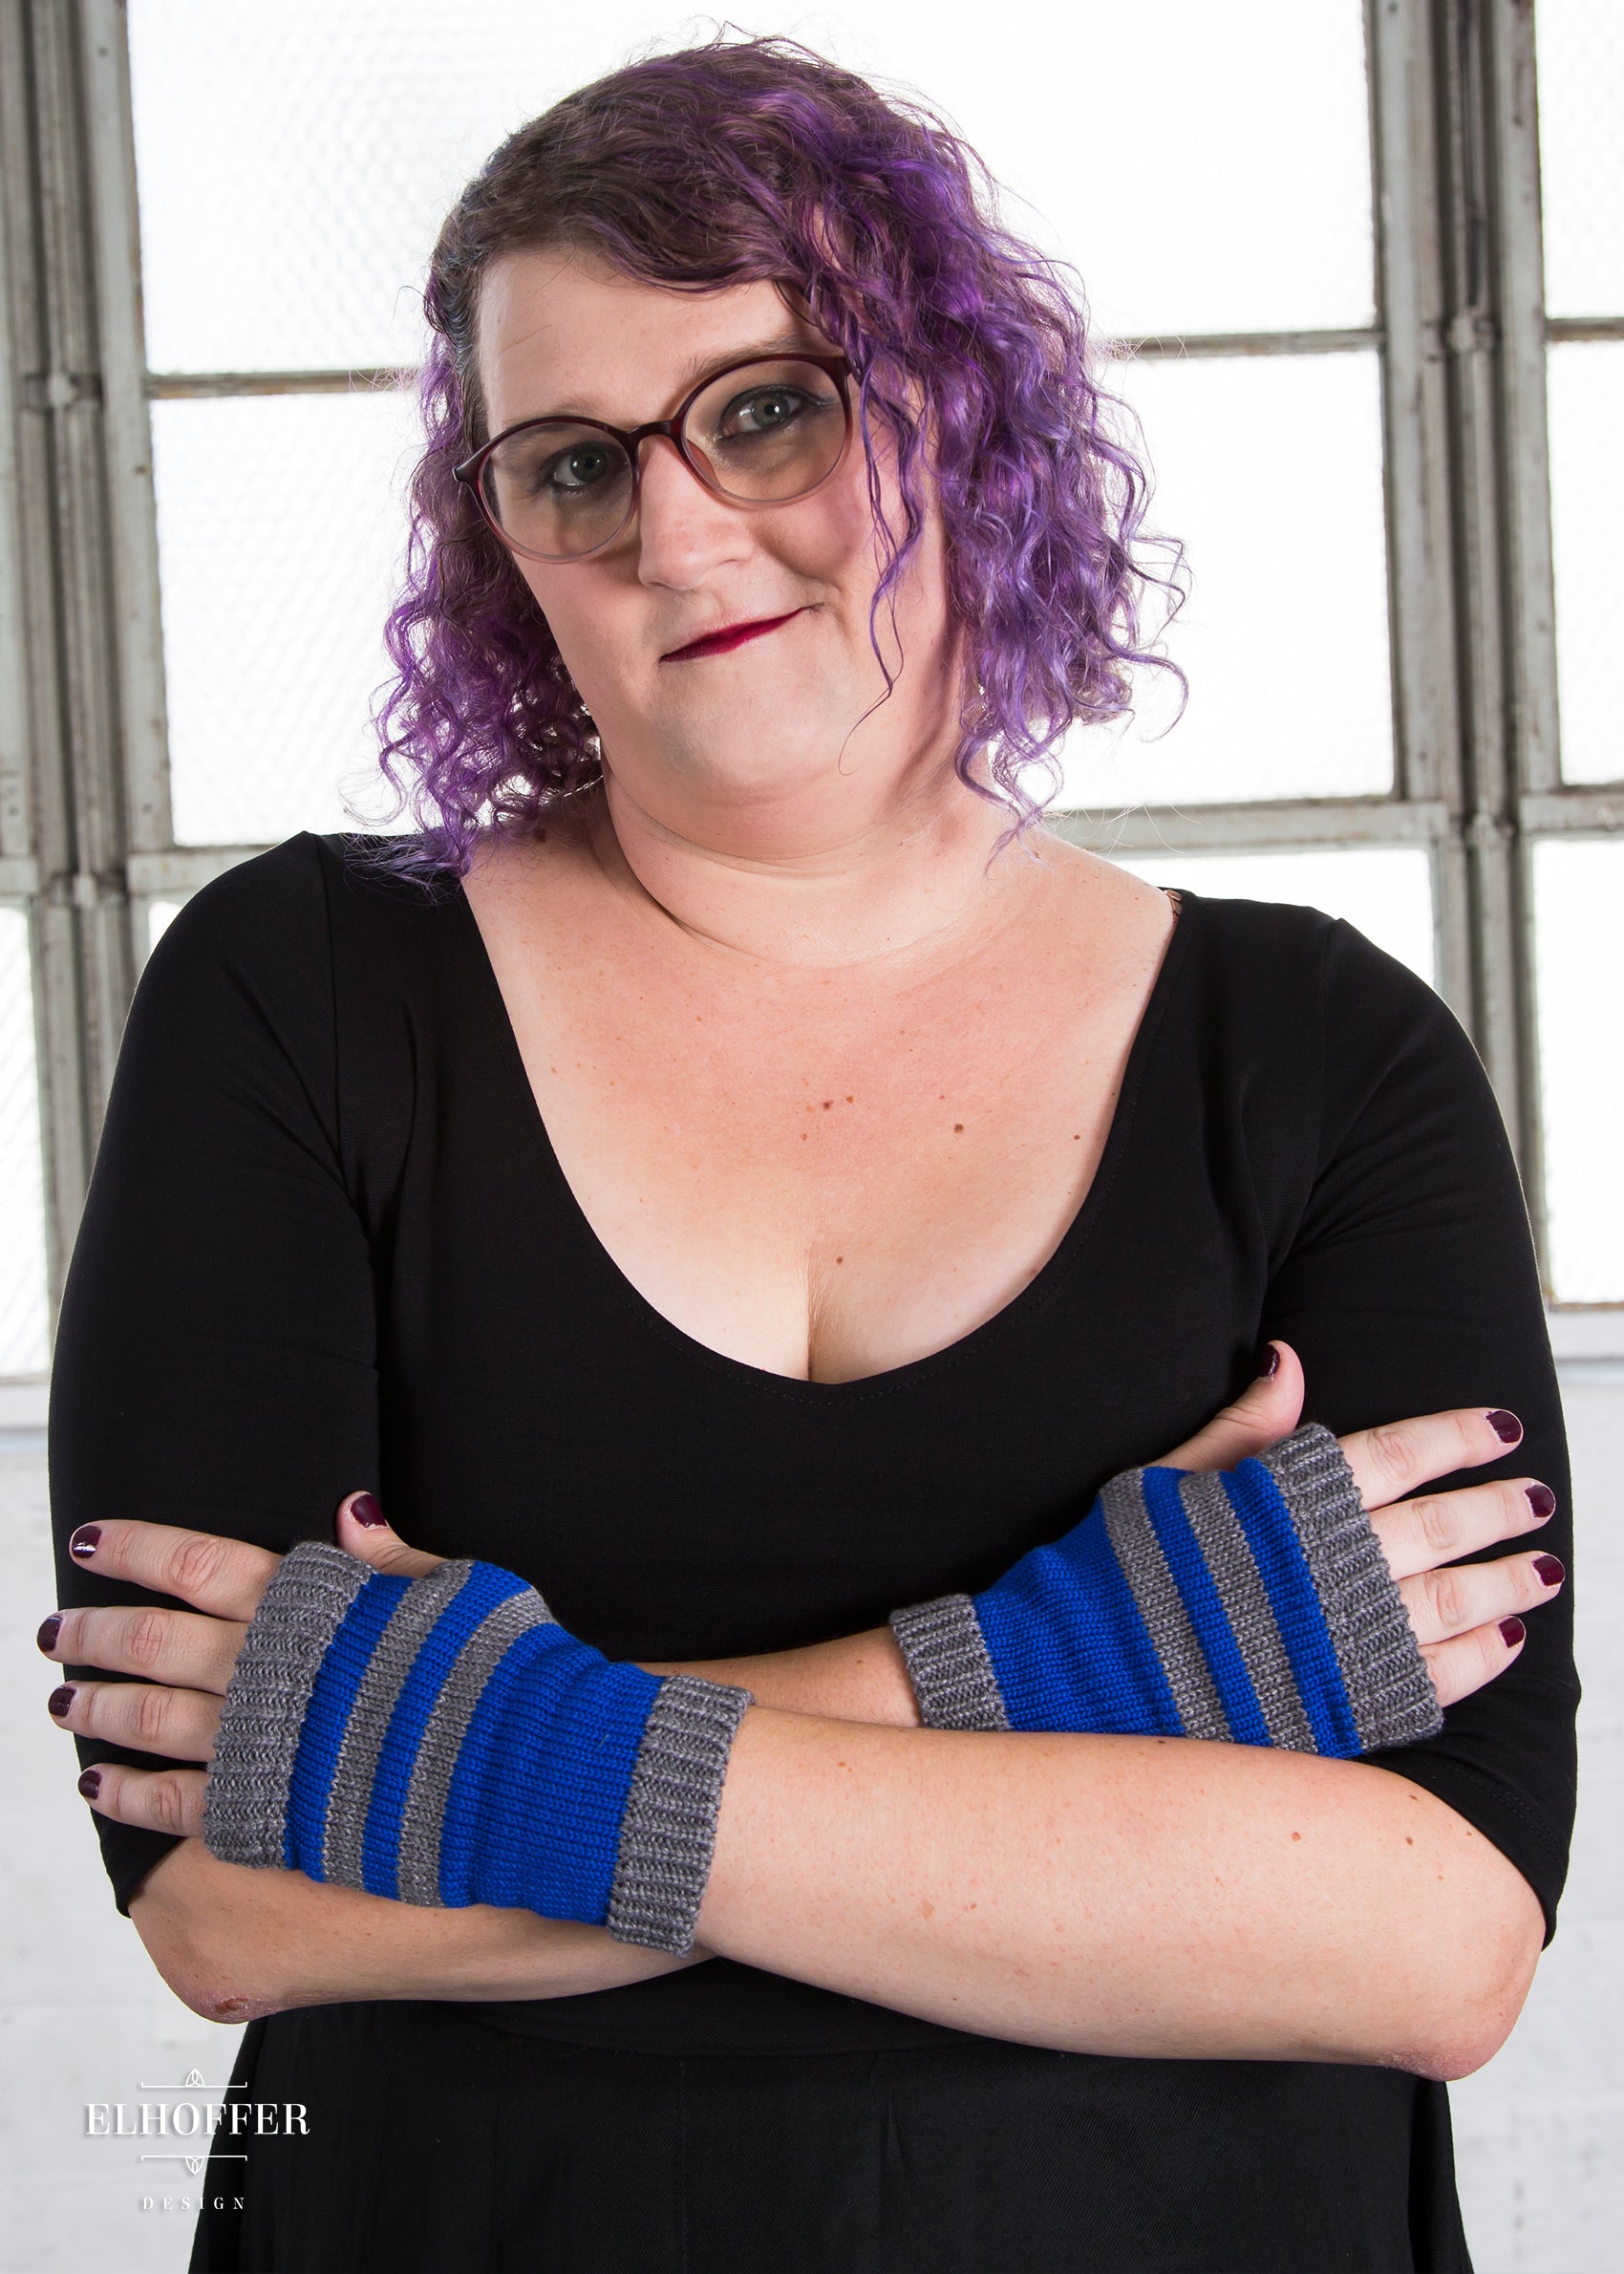 Riley, a size XL model with fair skin and curly purple hair, is wearing a paid of fingerless silver and blue gloves.